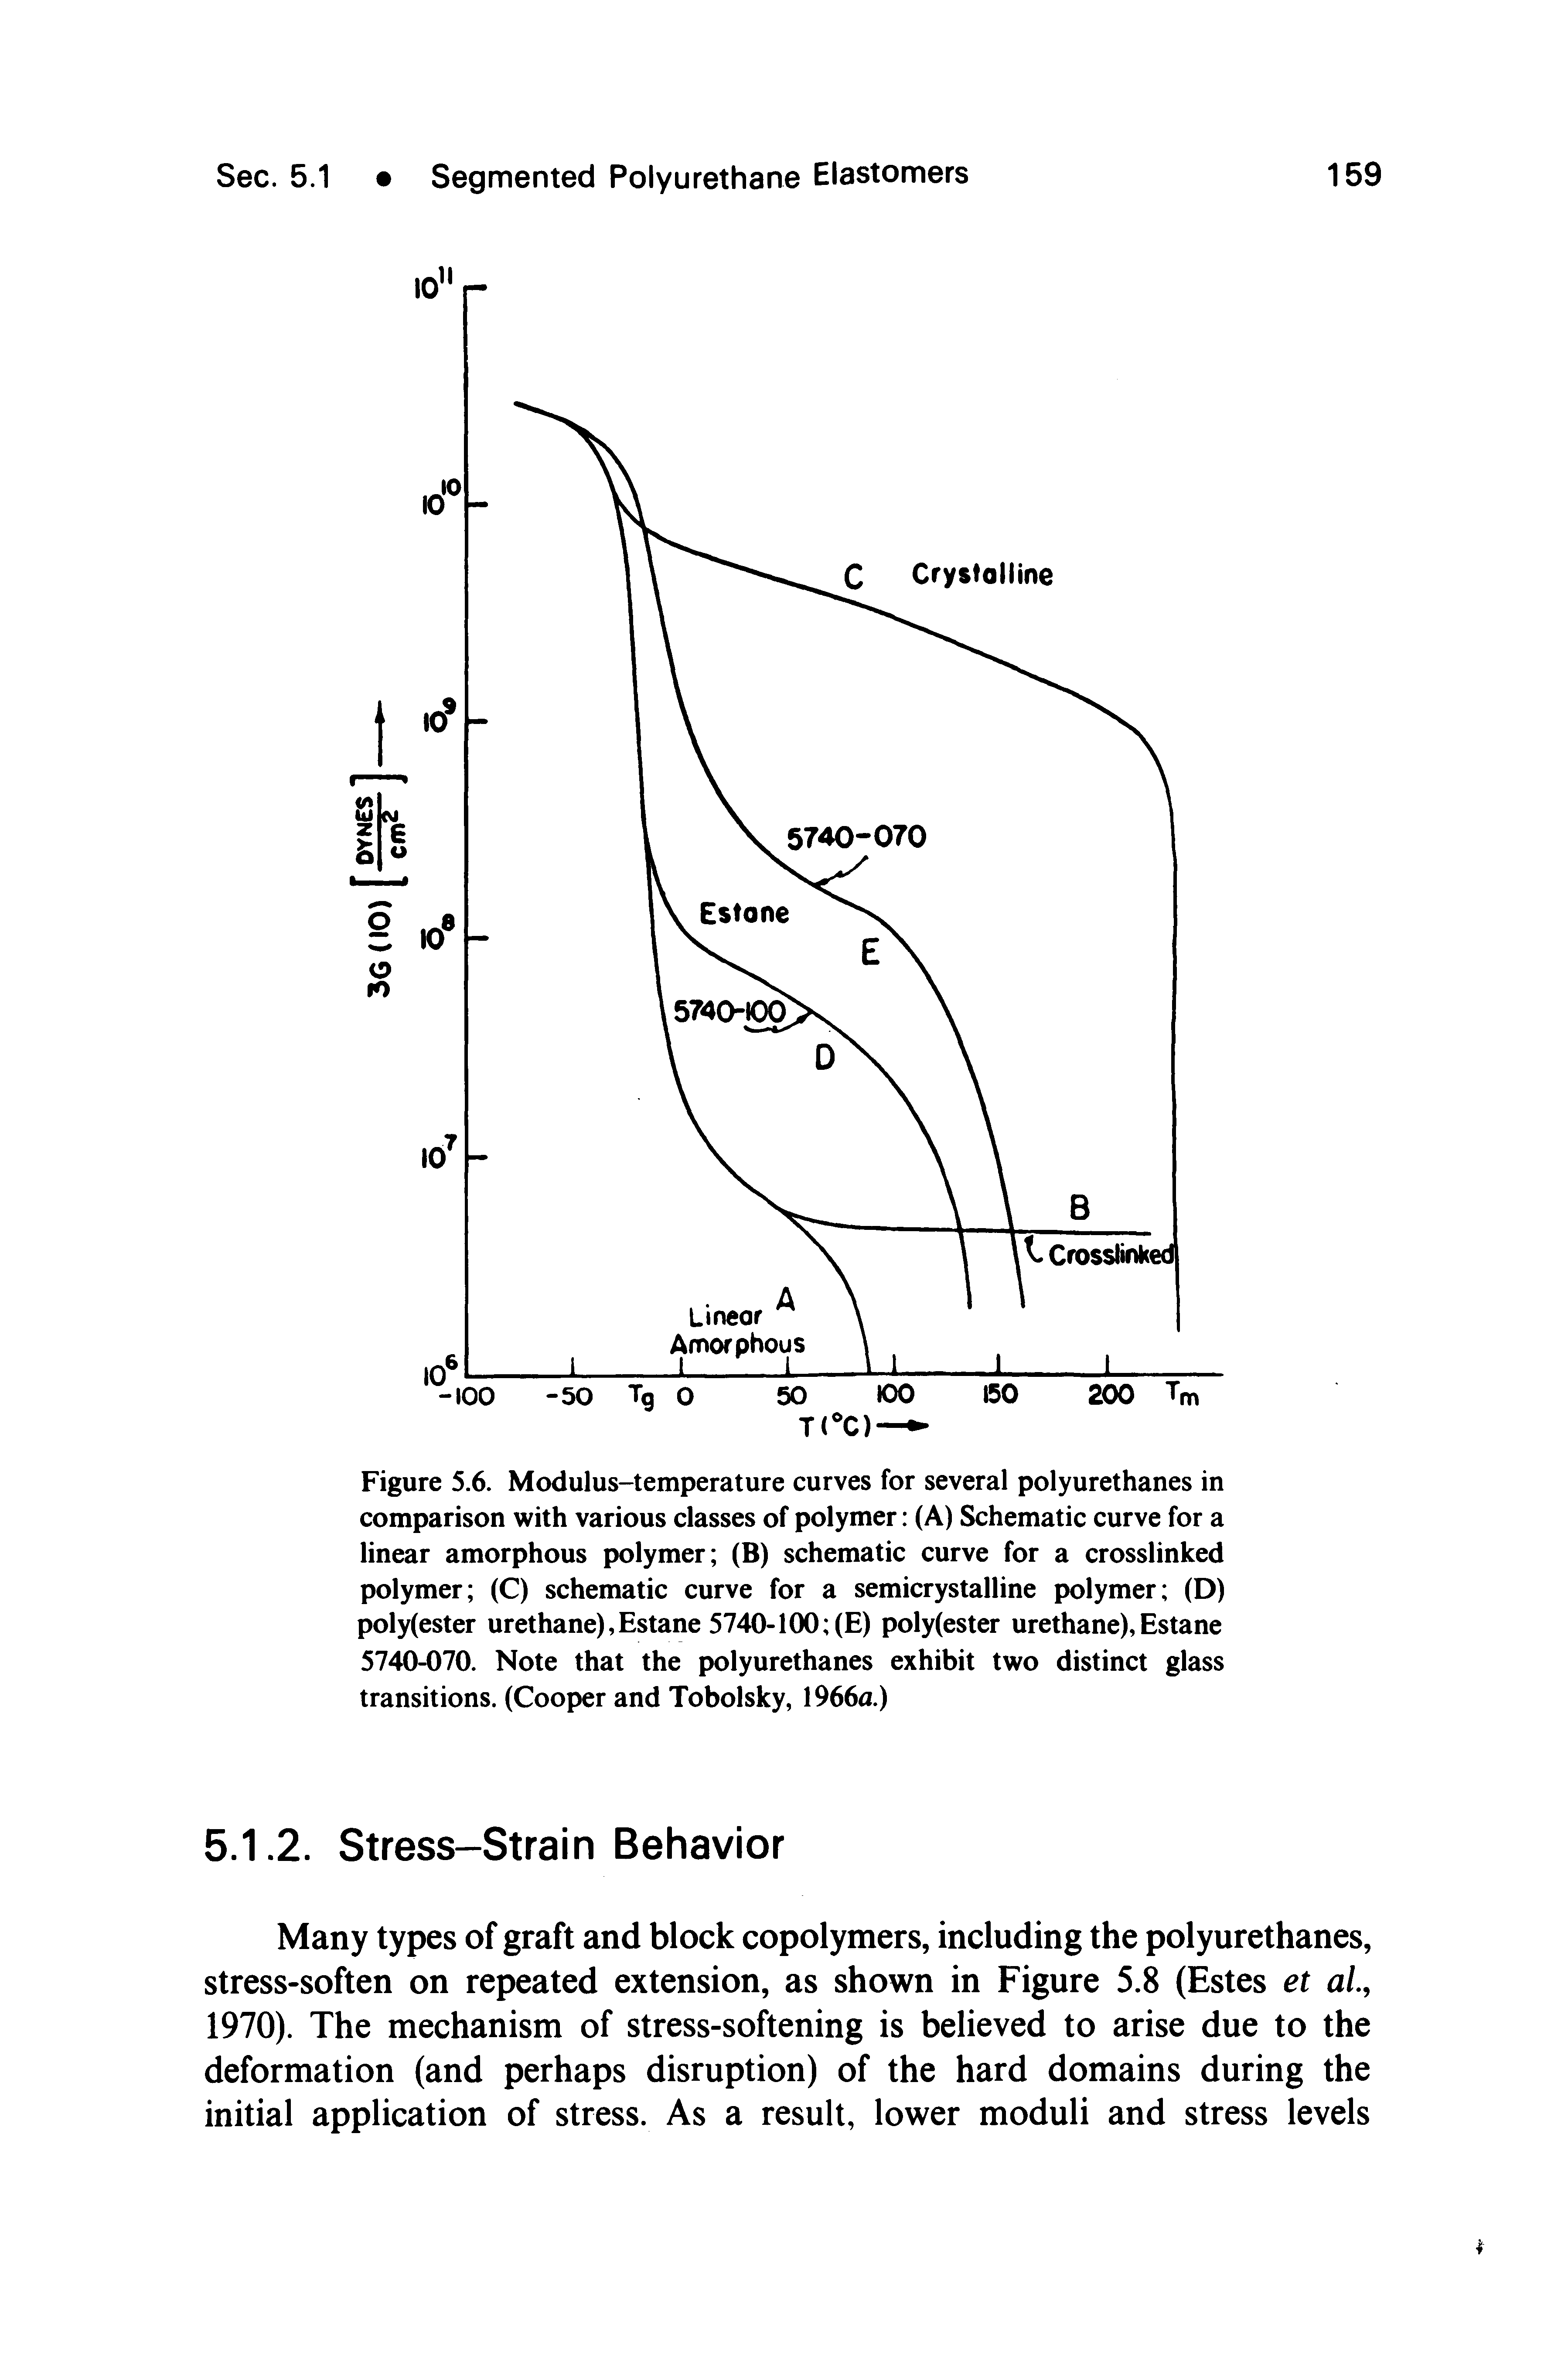 Figure 5.6. Modulus-temperature curves for several polyurethanes in comparison with various classes of polymer (A) Schematic curve for a linear amorphous polymer (B) schematic curve for a crosslinked polymer (C) schematic curve for a semicrystalline polymer (D) poly(ester urethane),Estane 5740-100 (E) poly(ester urethane),Estane 5740-070. Note that the polyurethanes exhibit two distinct glass transitions. (Cooper and Tobolsky, 1966u.)...